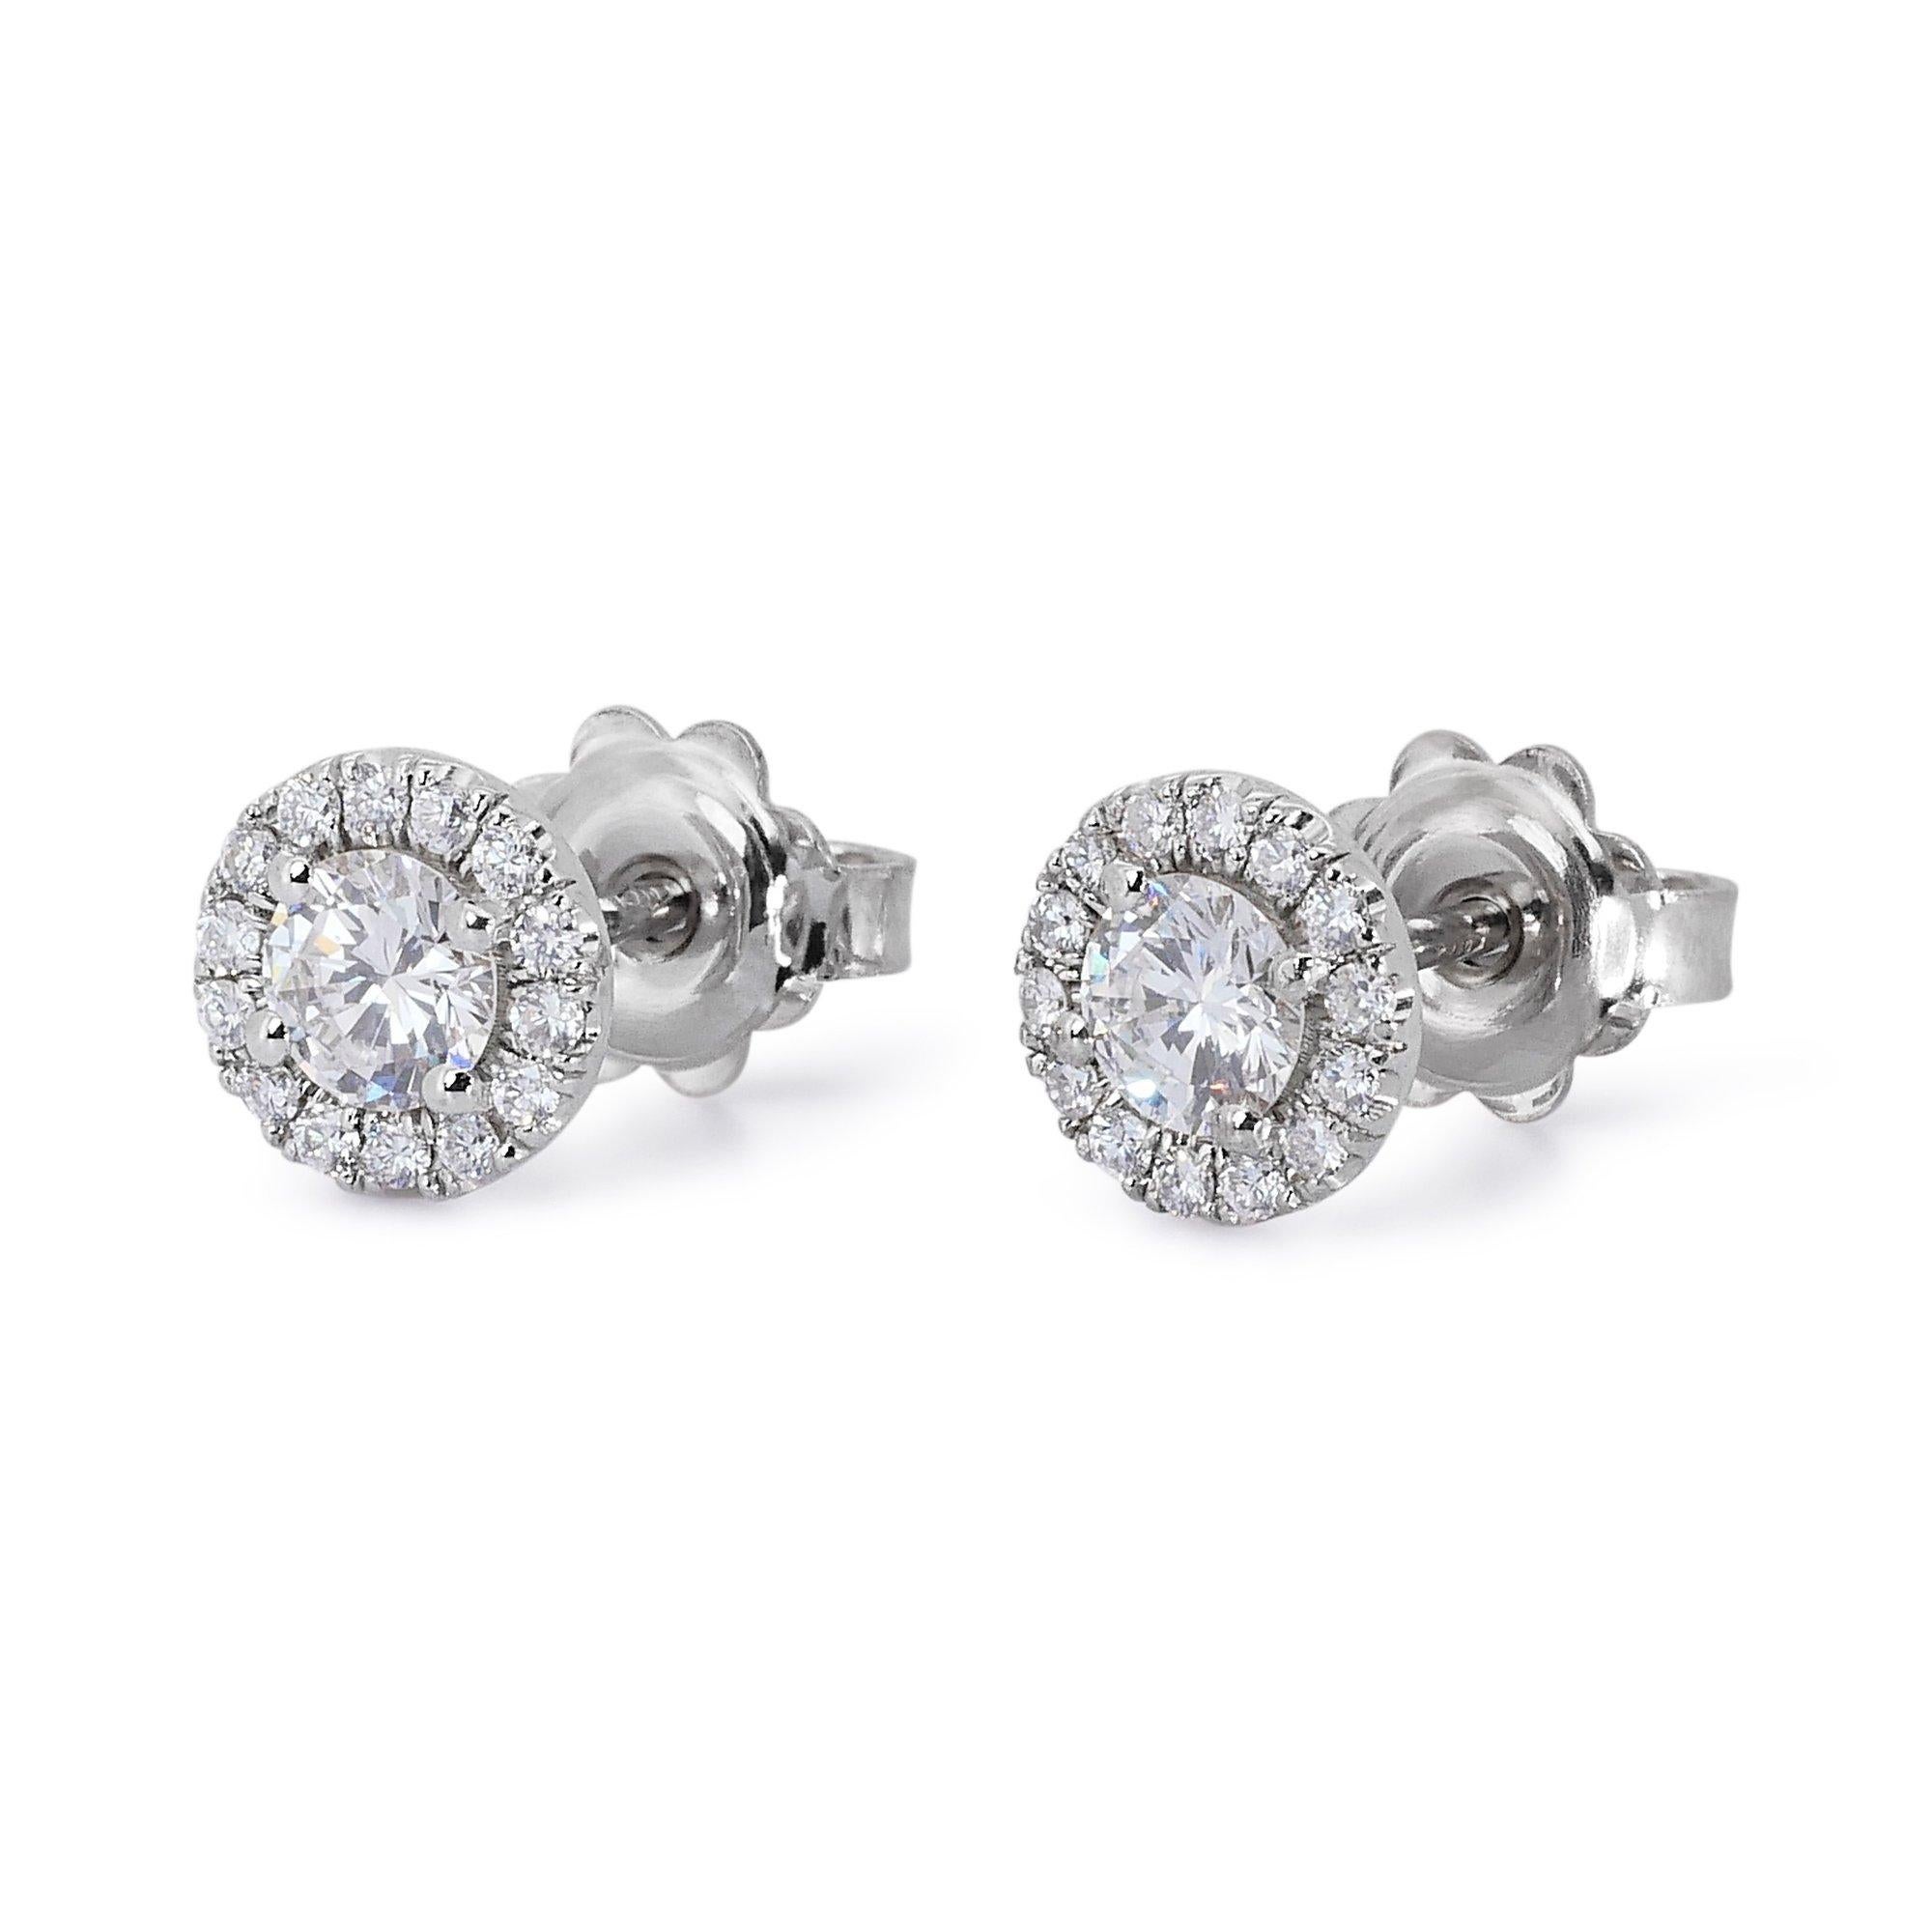 Luxurious 1.24ct Round Diamond Stud Earrings in 18K White Gold - GIA Certified

Featuring these exquisite diamond stud earrings boast a timeless design and exceptional sparkle. Crafted in luxurious 18k white gold, each earring features a stunning